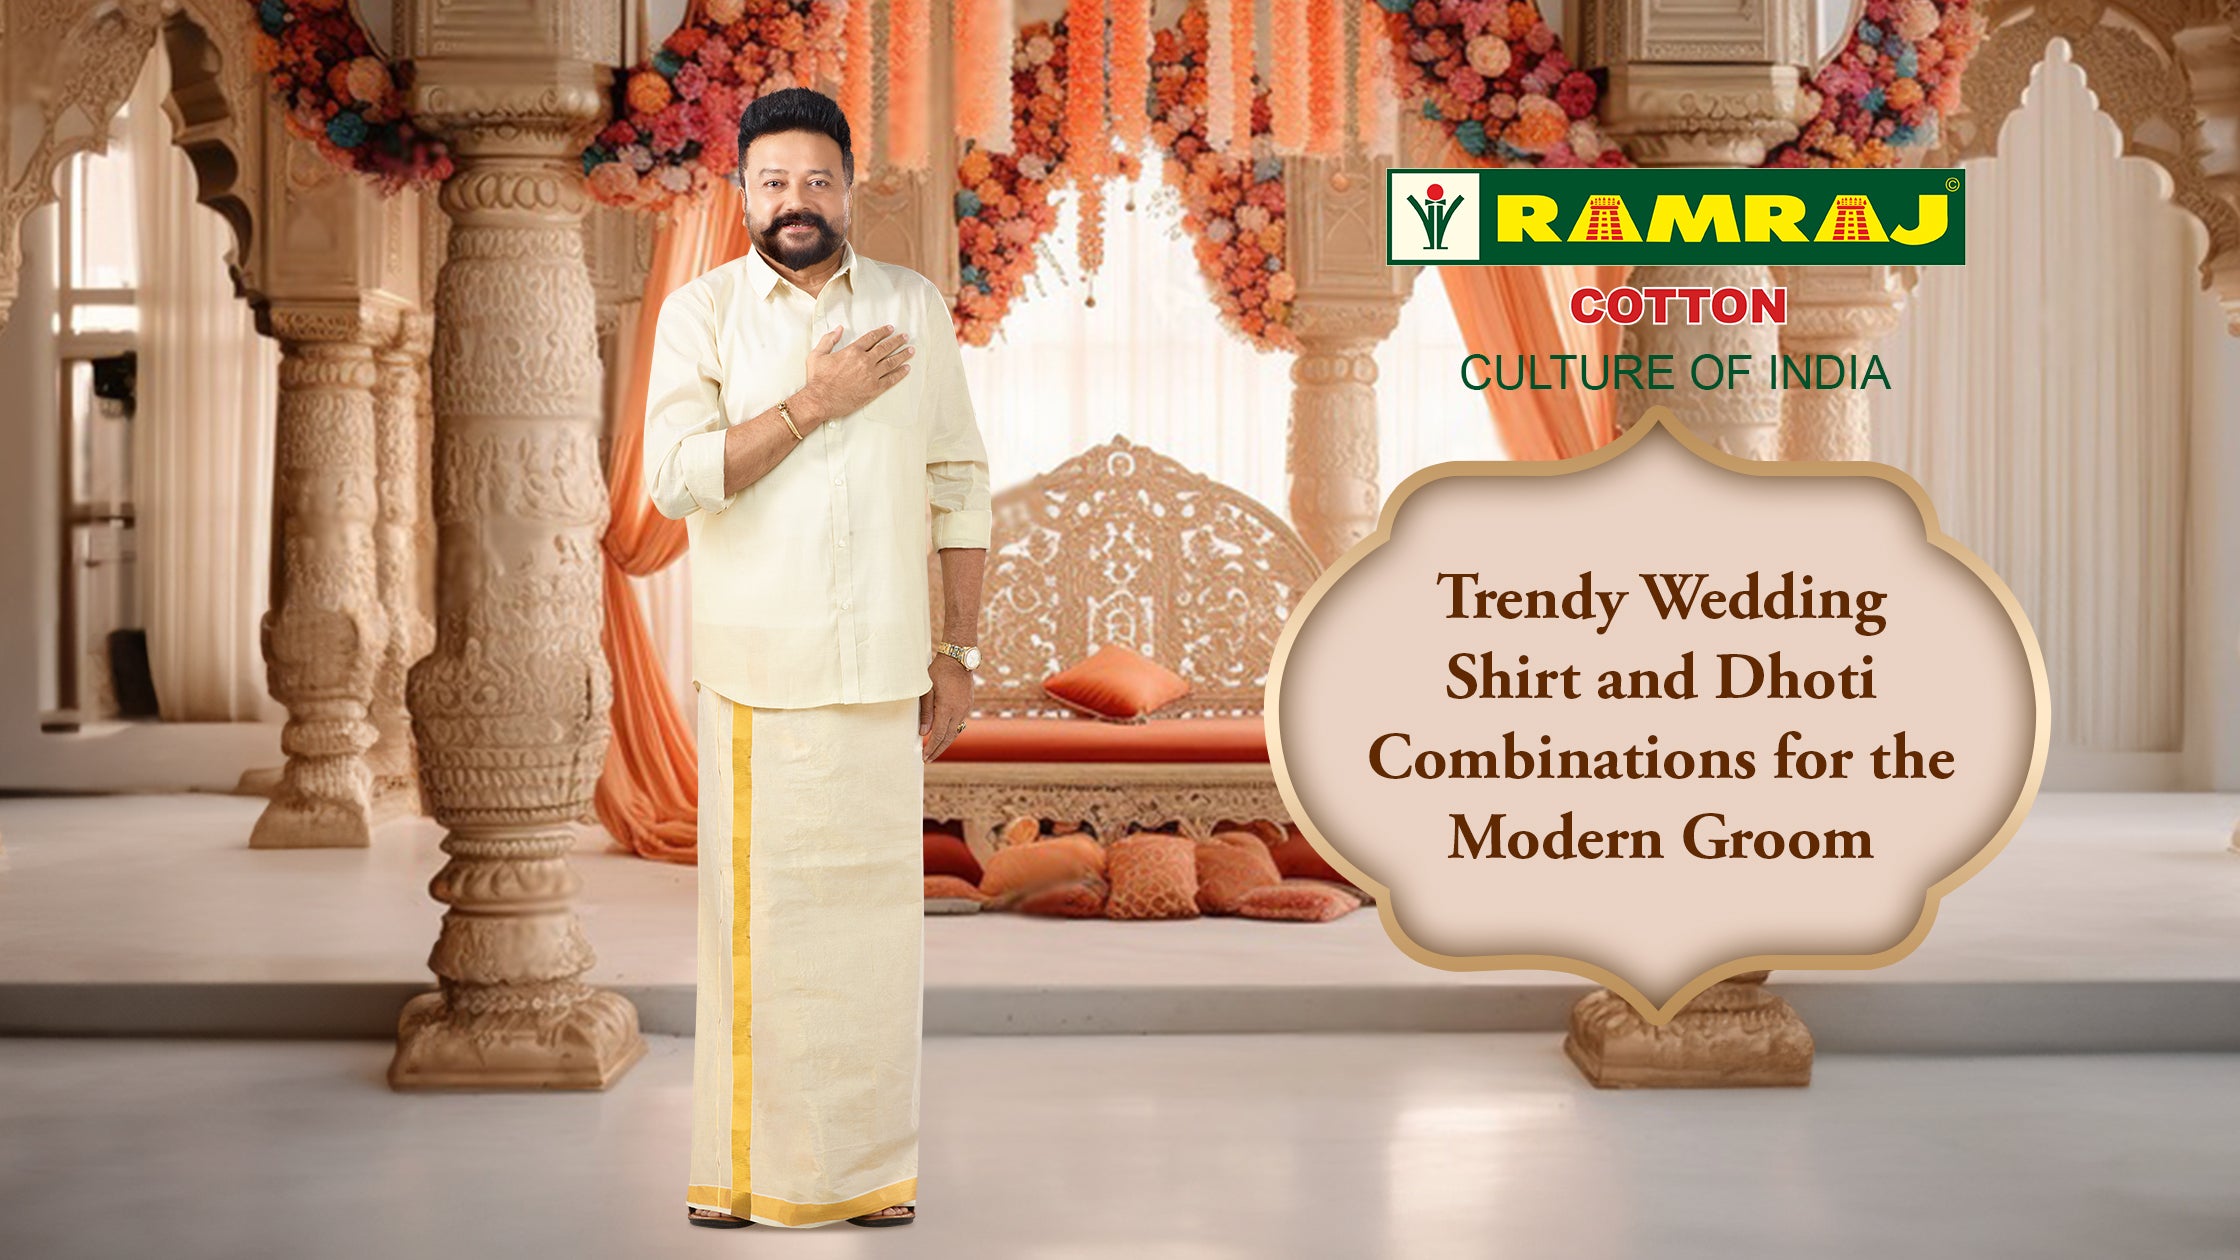 7 Trendy Wedding Shirt and Dhoti Combinations for the Modern Groom